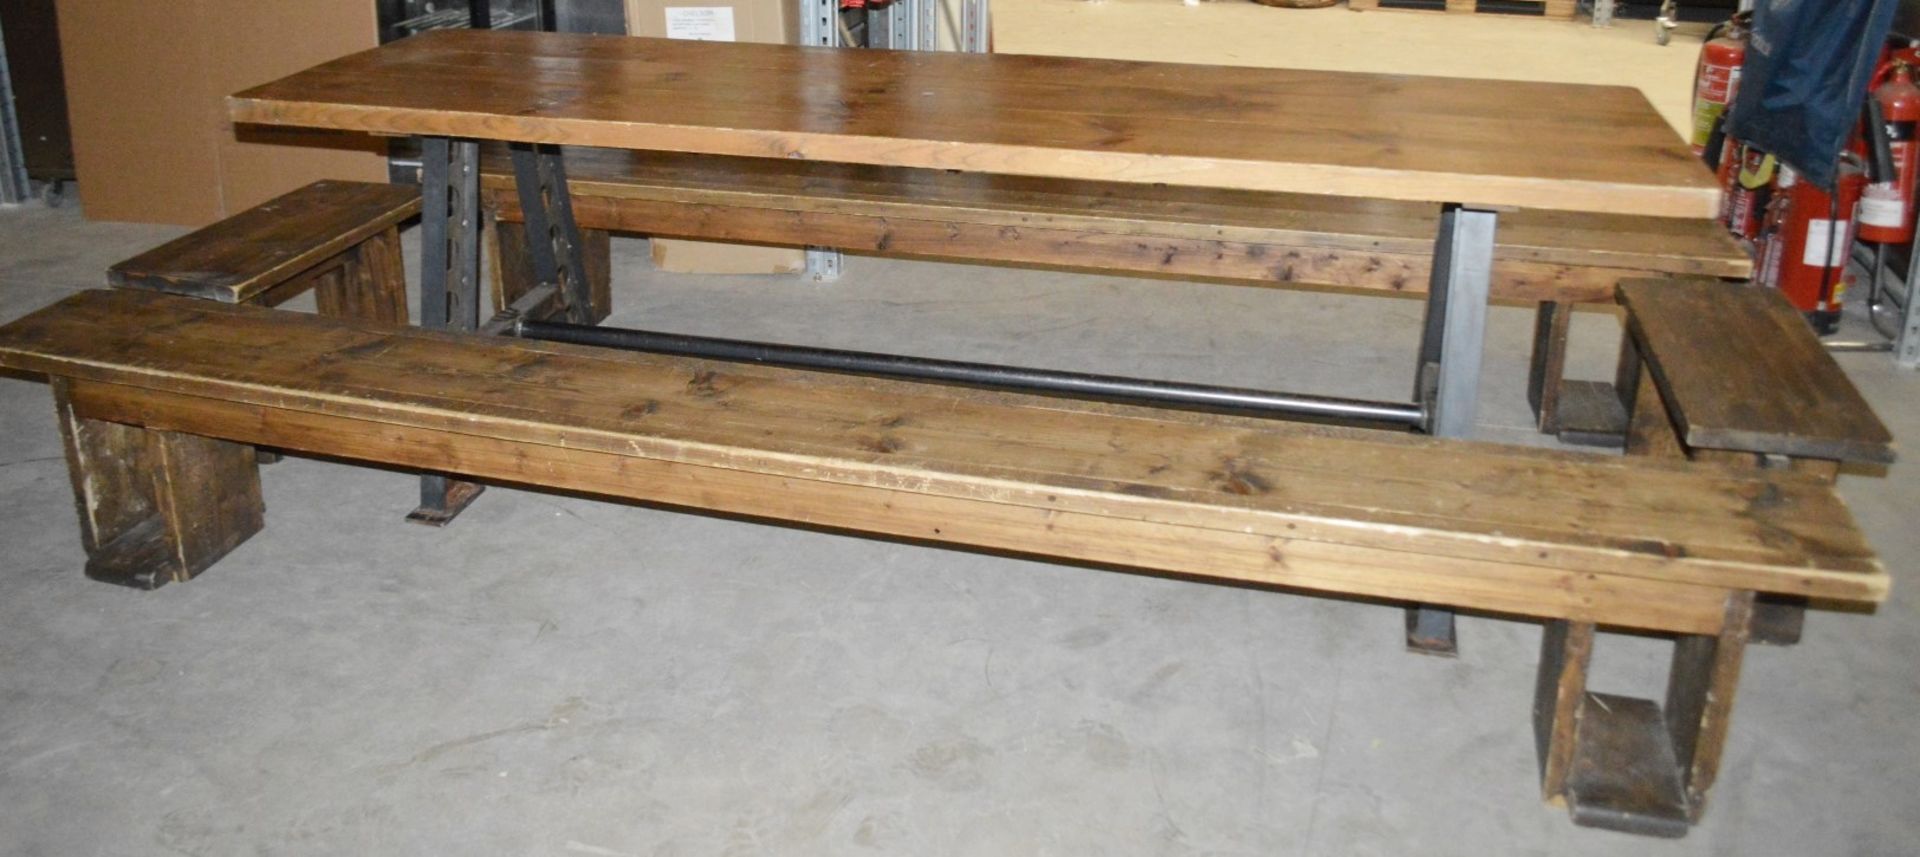 1 x Large Rustic  2.4 Metre Solid Wood Topped Banquet Table With 4 x Benches -  Pre-owned, From A - Image 4 of 11